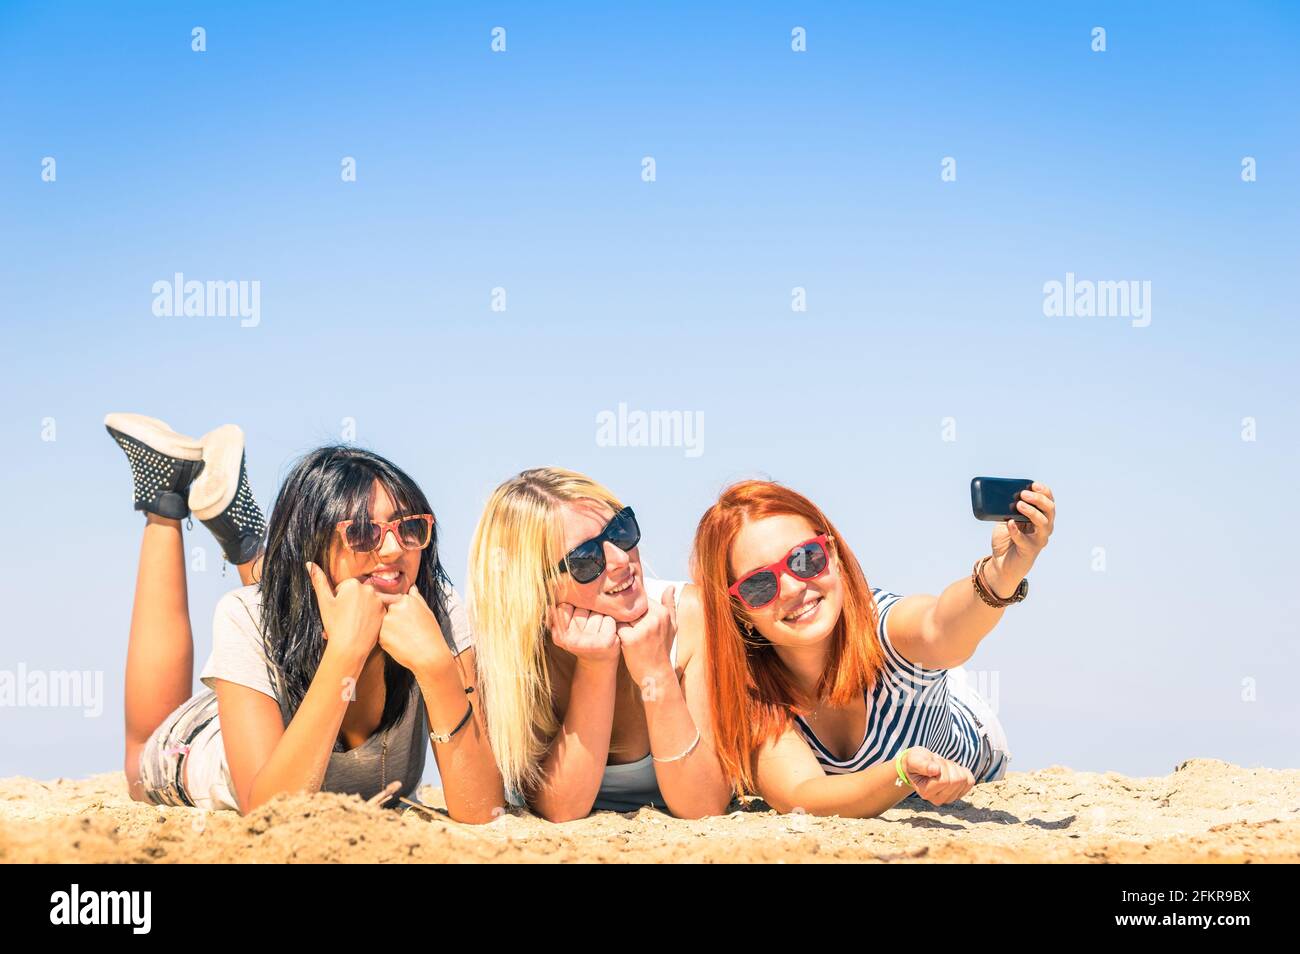 Group of girlfriends taking a selfie at the beach - Concept of friendship and fun in the summer with new trends and technology Stock Photo